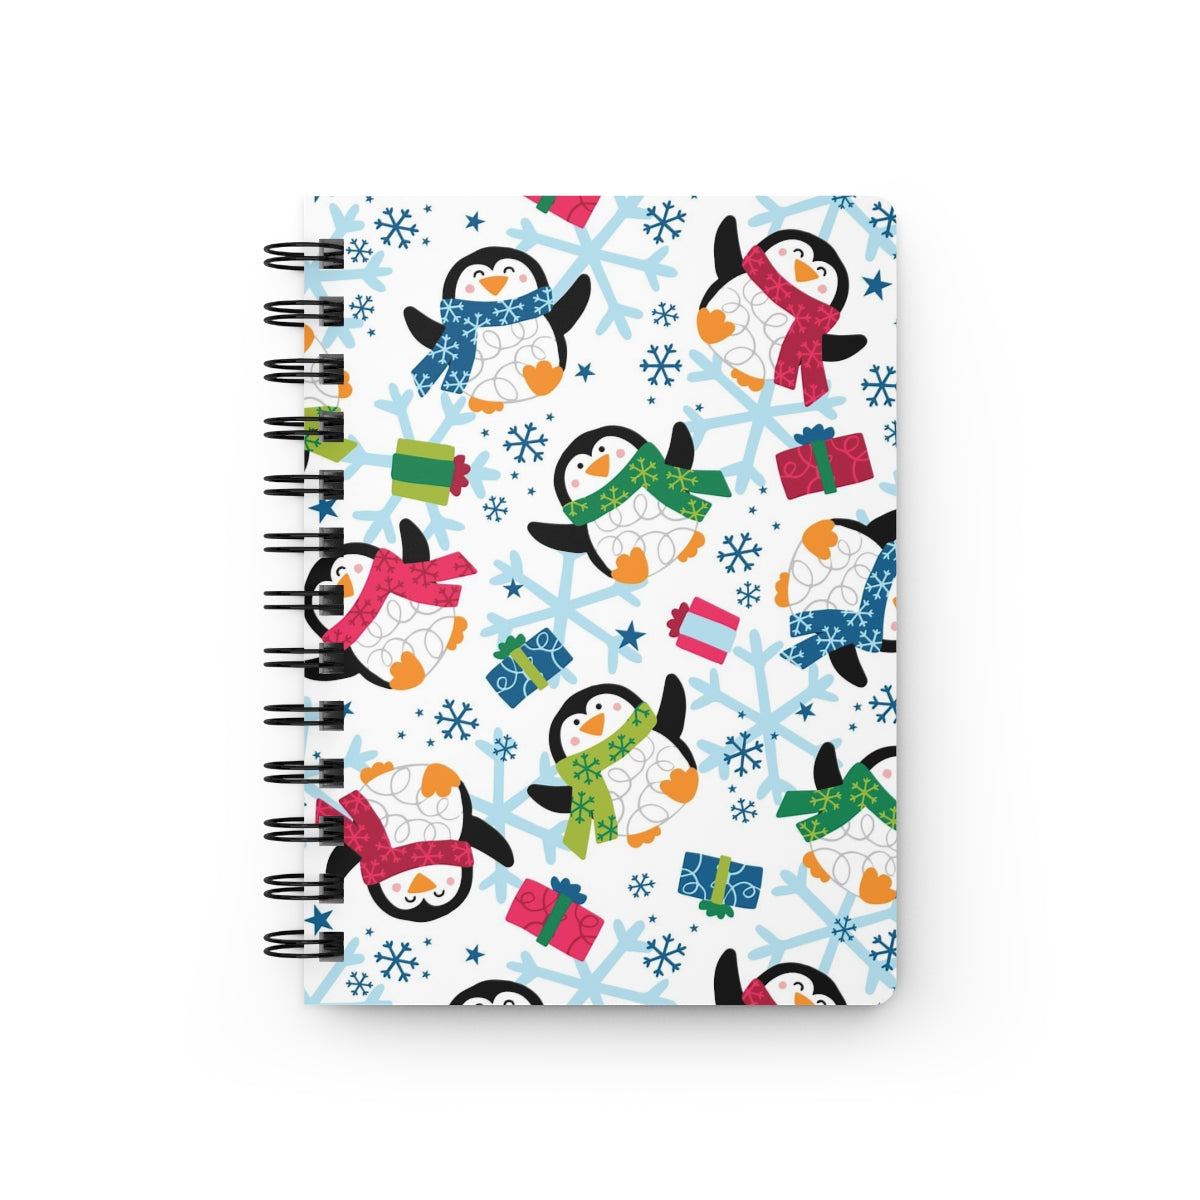 Penguins and Snowflakes Spiral Bound Journal